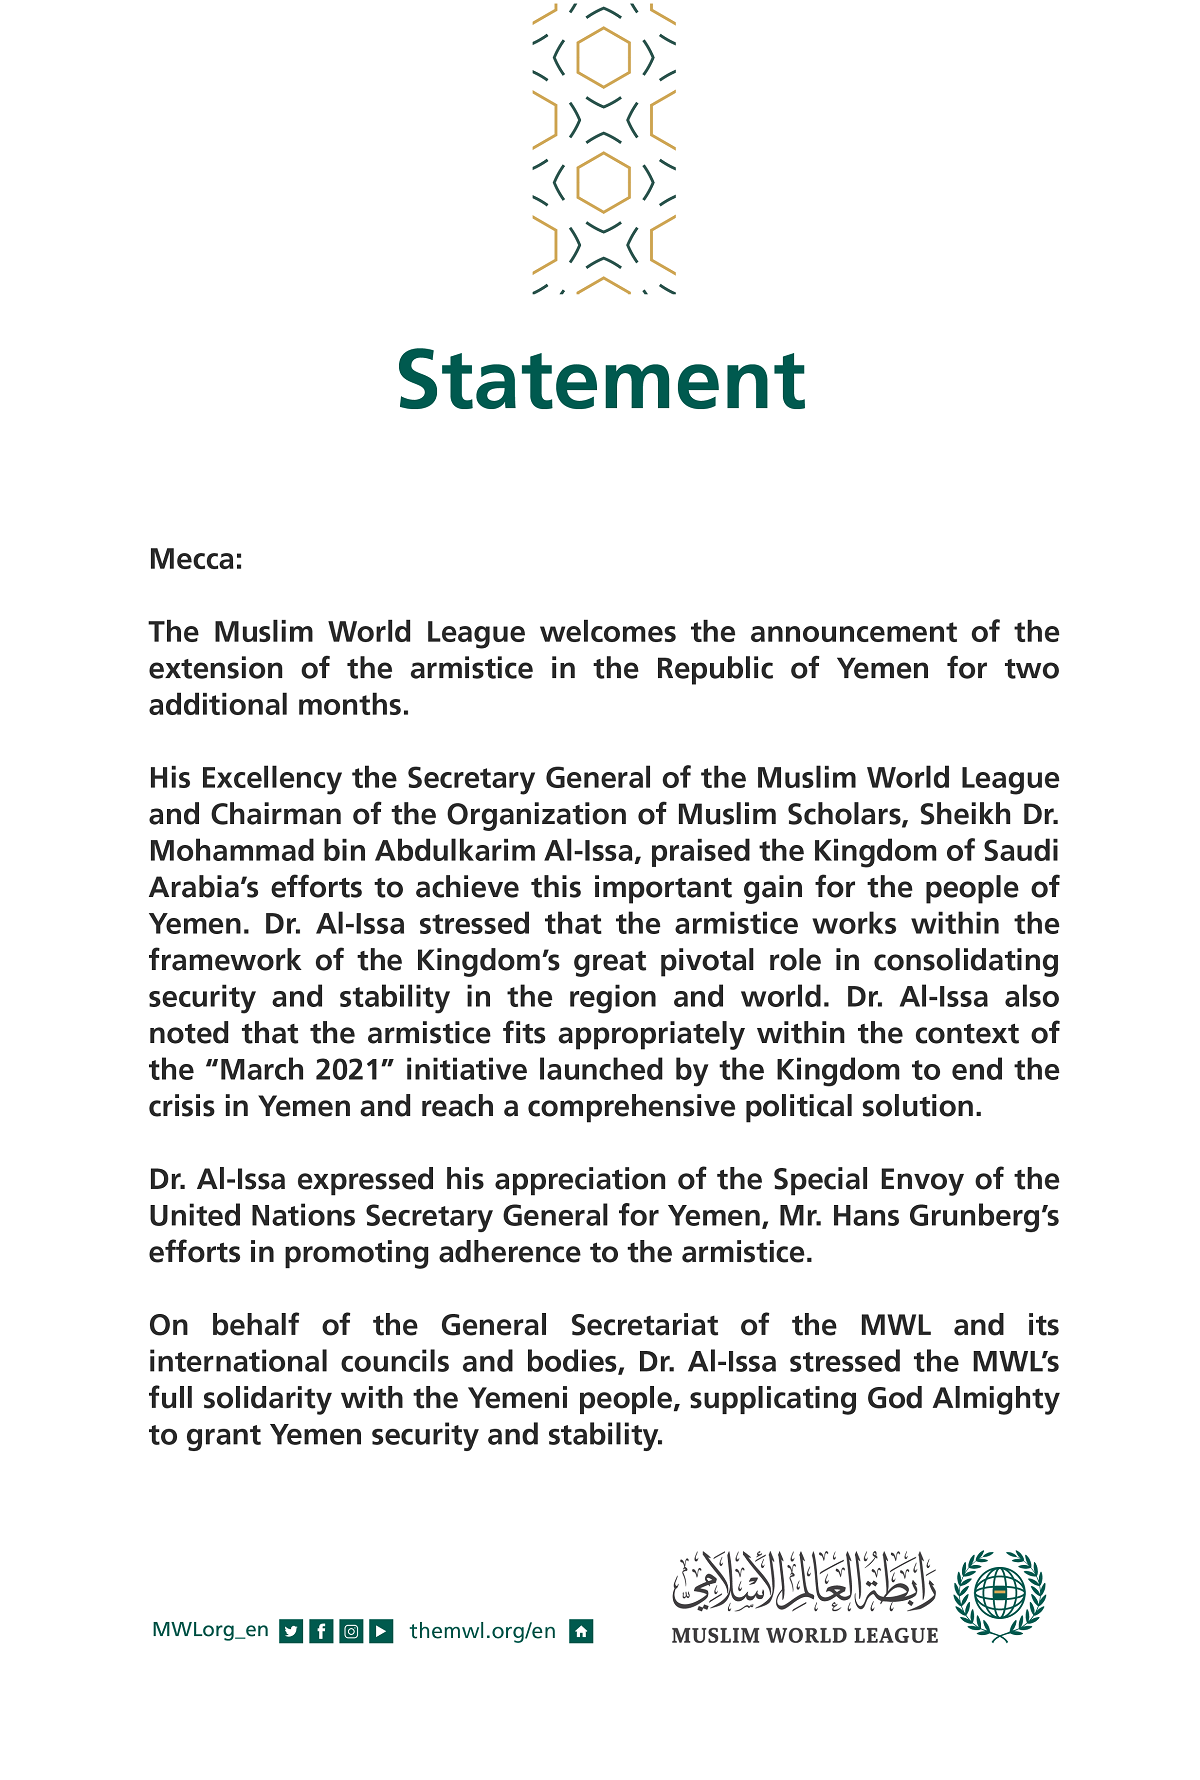 Muslim World League Secretary General H.E. Sheikh Dr. Mohammad alissa  expresses his appreciation for the efforts of the Kingdom of Saudi Arabia in achieving an extension of the armistice in Yemen, a vital gain for the Yemeni people.